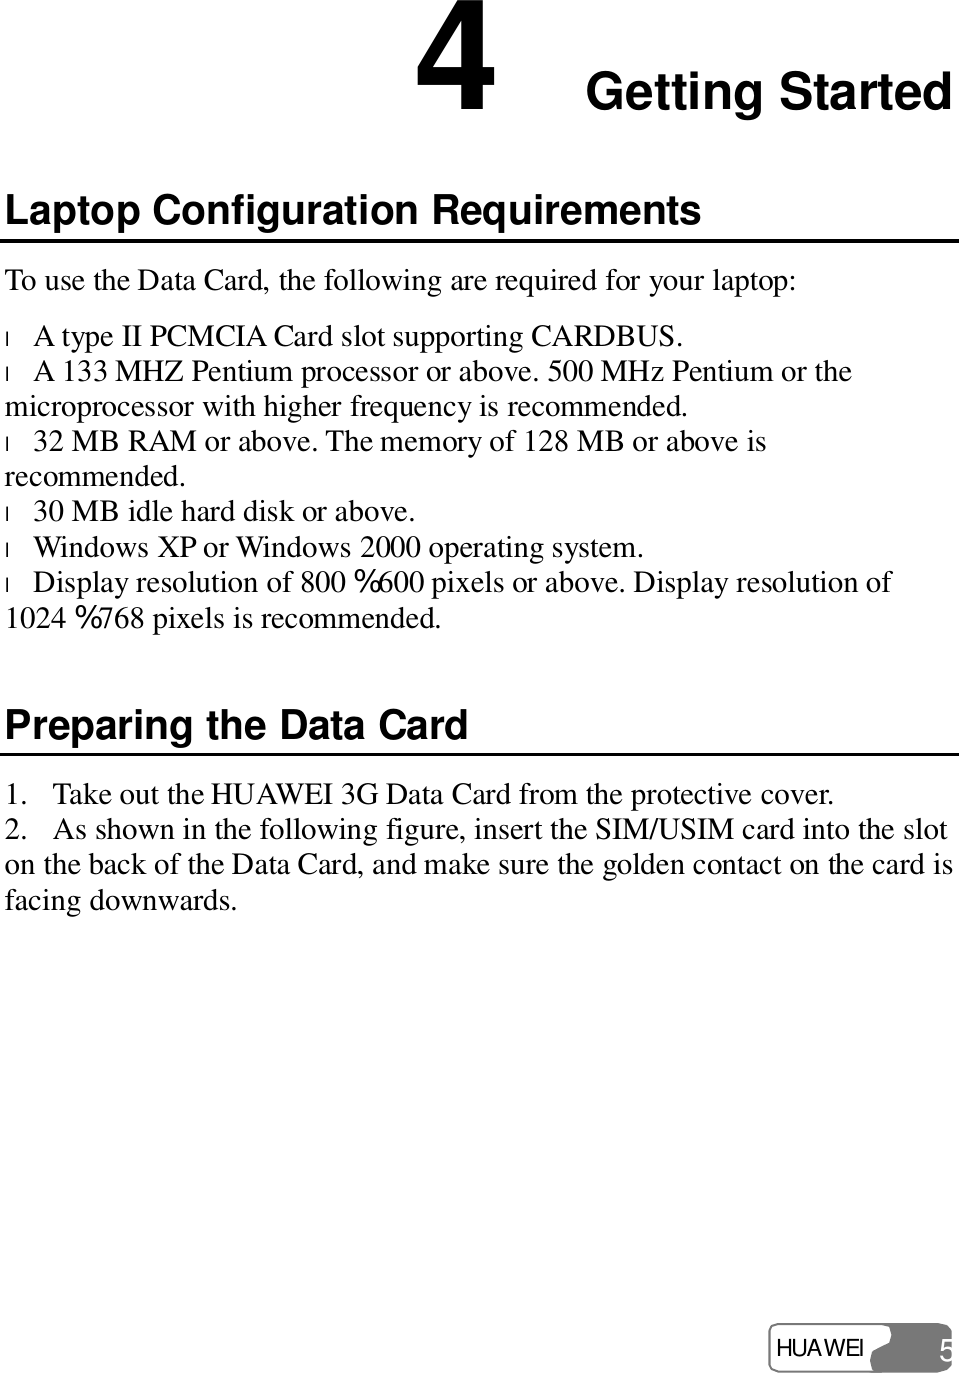  HUAWEI  5 4  Getting Started Laptop Configuration Requirements To use the Data Card, the following are required for your laptop: l A type II PCMCIA Card slot supporting CARDBUS. l A 133 MHZ Pentium processor or above. 500 MHz Pentium or the microprocessor with higher frequency is recommended. l 32 MB RAM or above. The memory of 128 MB or above is recommended. l 30 MB idle hard disk or above. l Windows XP or Windows 2000 operating system. l Display resolution of 800 % 600 pixels or above. Display resolution of 1024 % 768 pixels is recommended. Preparing the Data Card 1. Take out the HUAWEI 3G Data Card from the protective cover. 2. As shown in the following figure, insert the SIM/USIM card into the slot on the back of the Data Card, and make sure the golden contact on the card is facing downwards. 